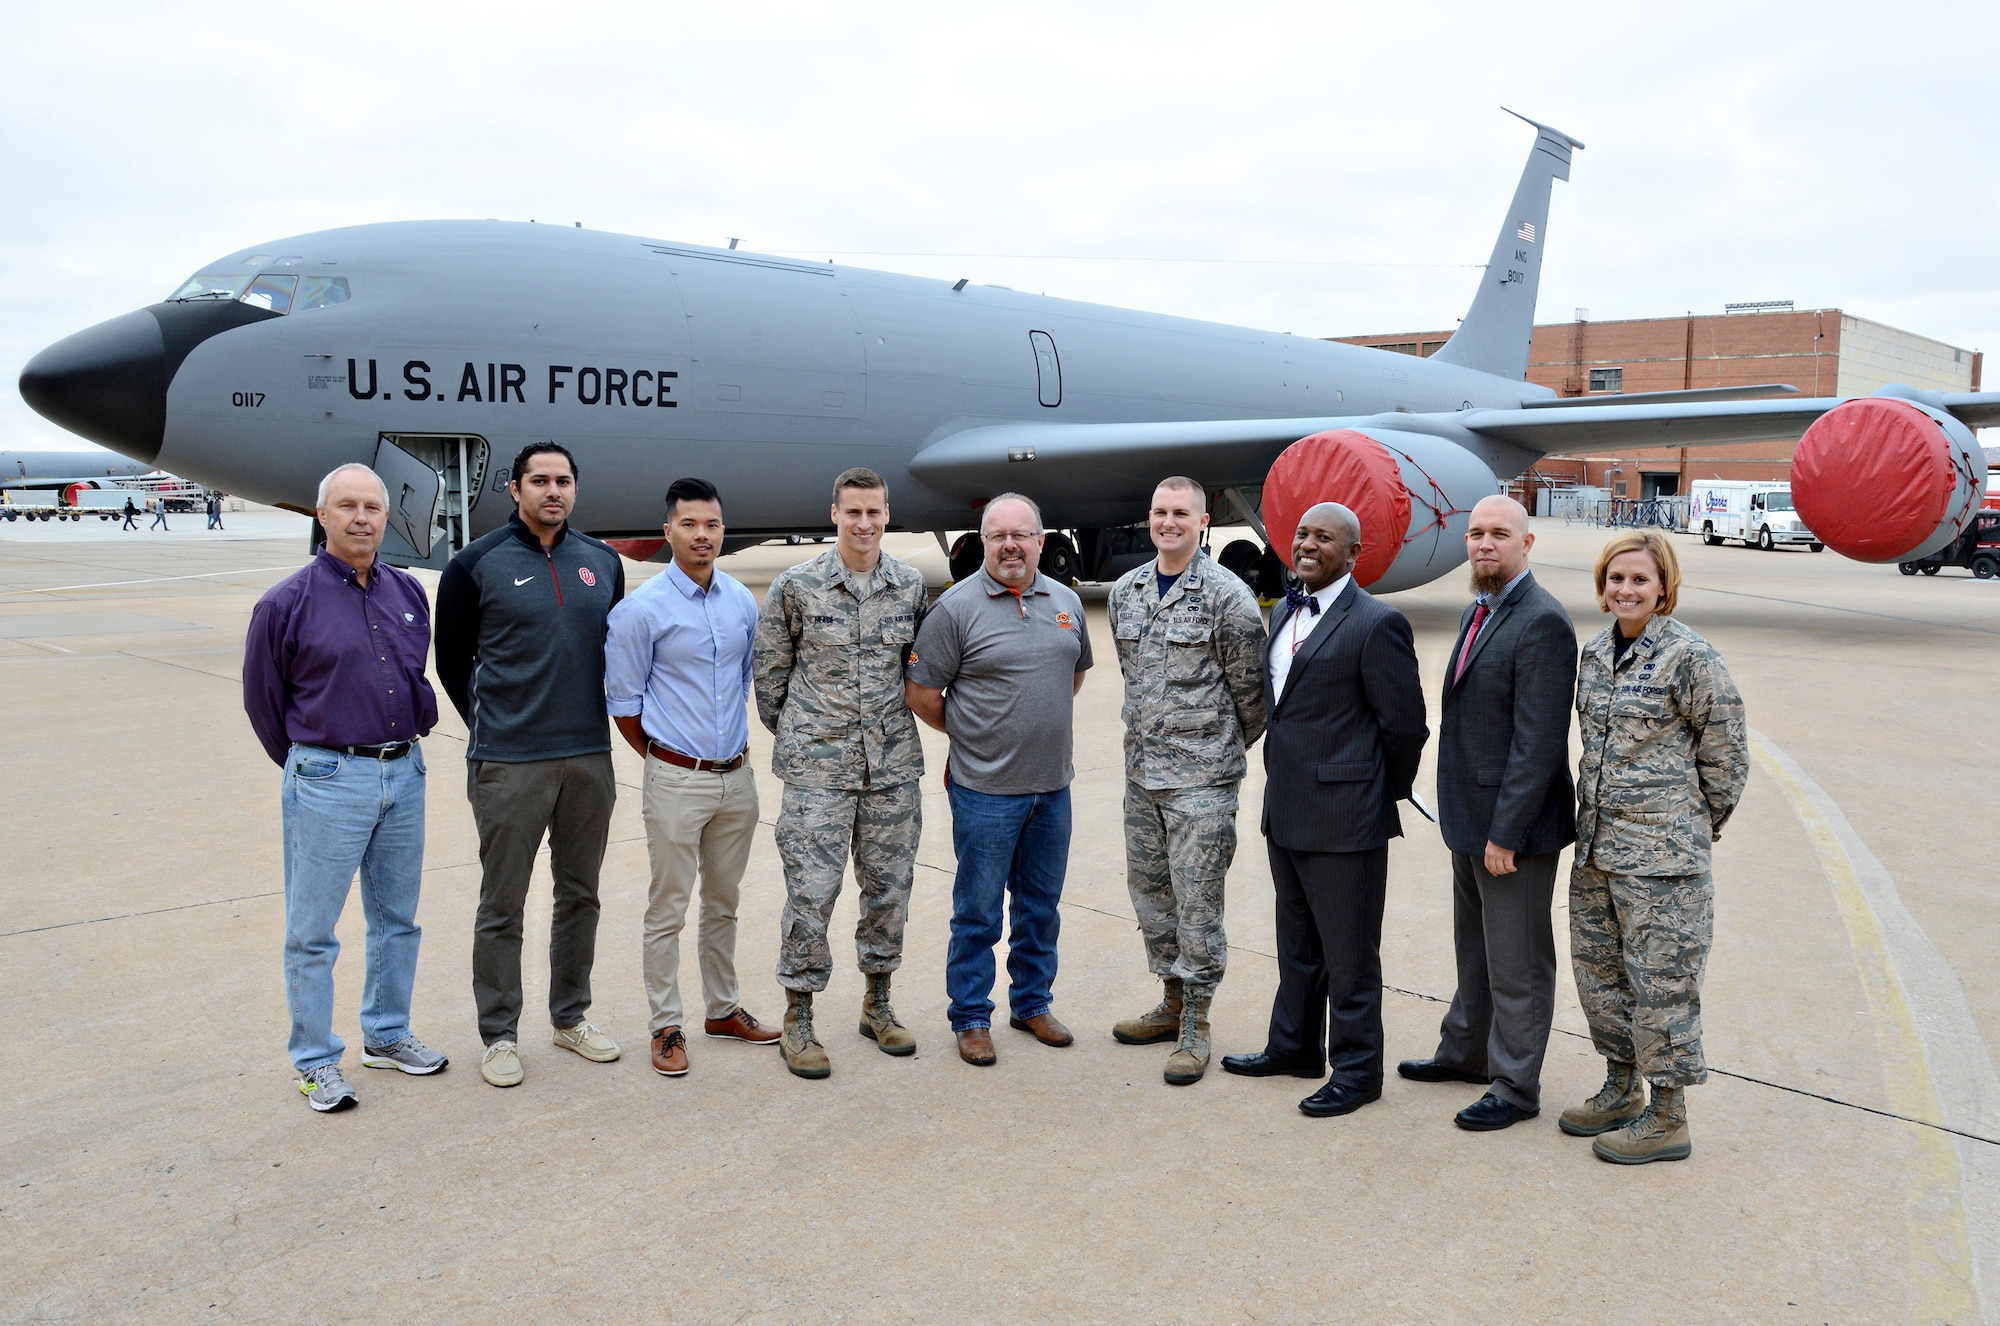 The KC-135 Stratotanker team members for the Block 45 upgrade are, from left, Dan Olson, Ivan Crespo, Long Nguyen, Lt. Joshua Neace, Sam Speziale, Capt. Dustin Keller, Keith Lymore, Jon Cloud and Capt. Tyner Apt. Team members not pictured are Capt. Anthony Konakowitz, Nick Binkley and Master Sgt. Dante Alexander. (Air Force photo by Kelly White)